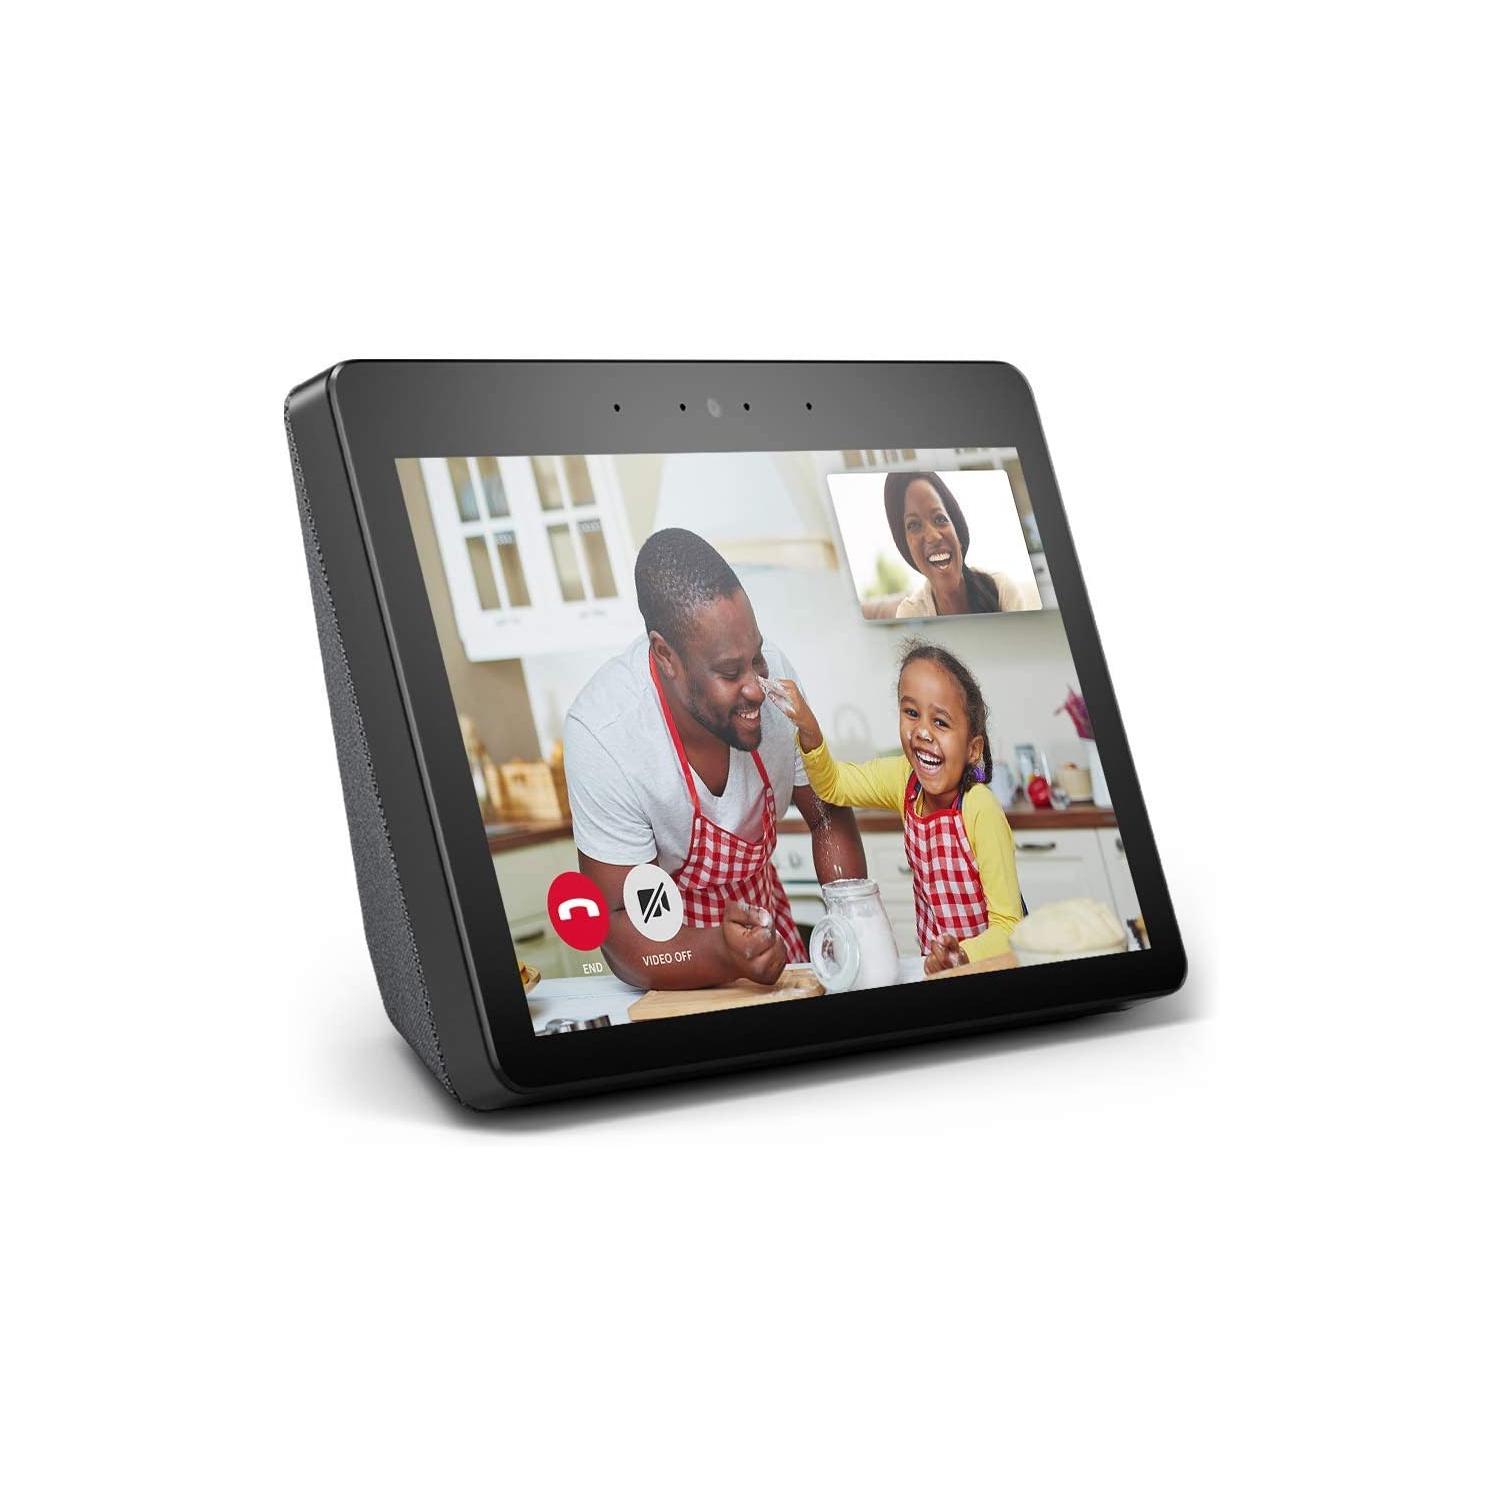 Refurbished (Good) Amazon Echo Show 10 (2nd Gen) | Premium 10.1” HD smart display with Alexa – stay connected with video calling - Charcoal